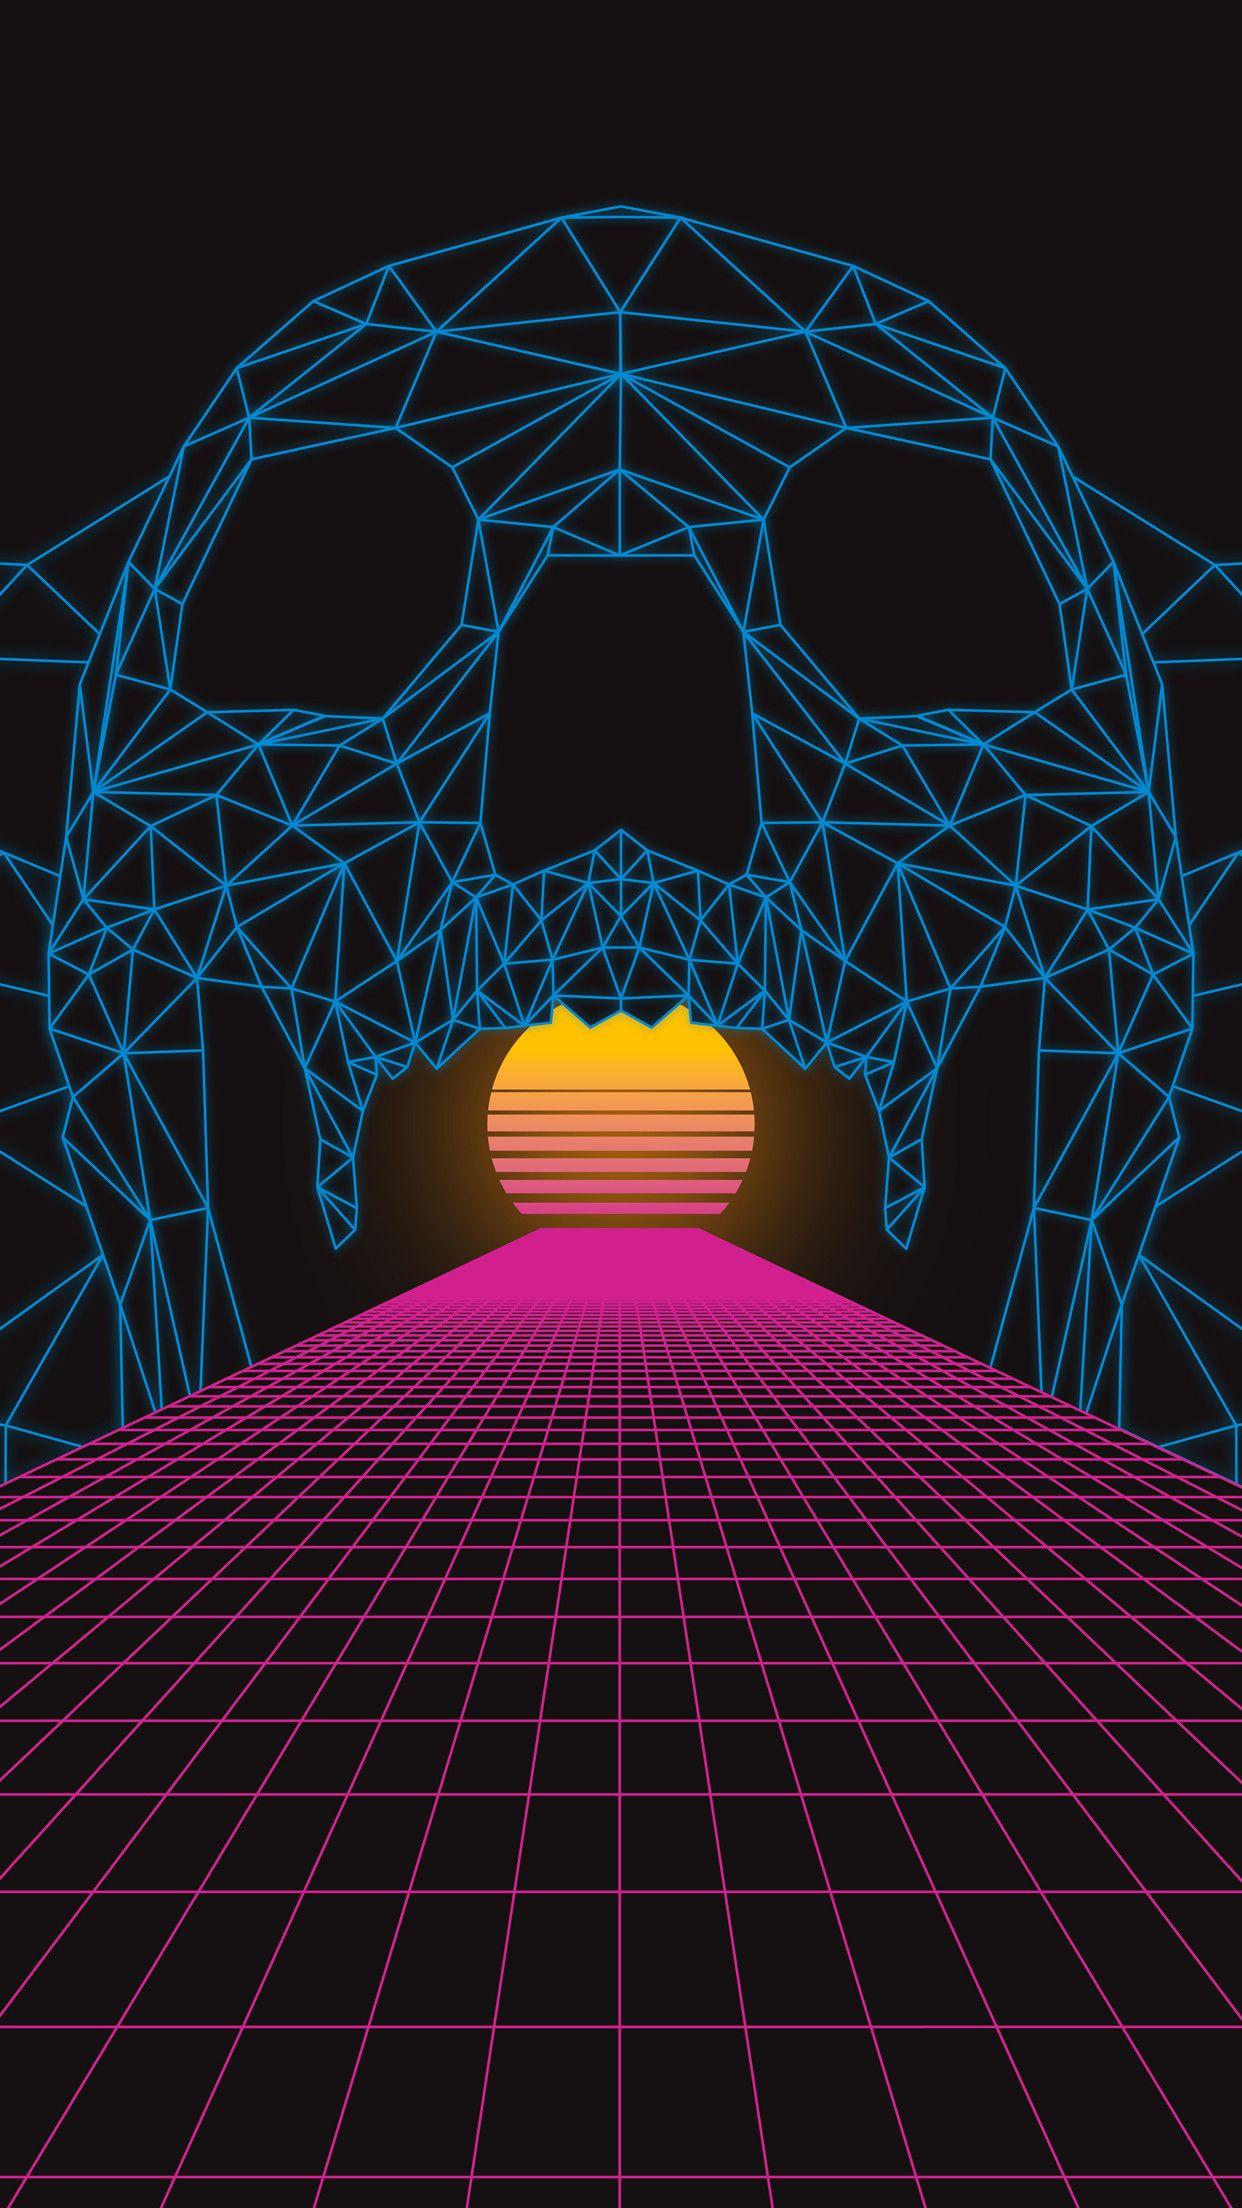 SYNTHWAVE CITY PHONE WALLPAPER 4K